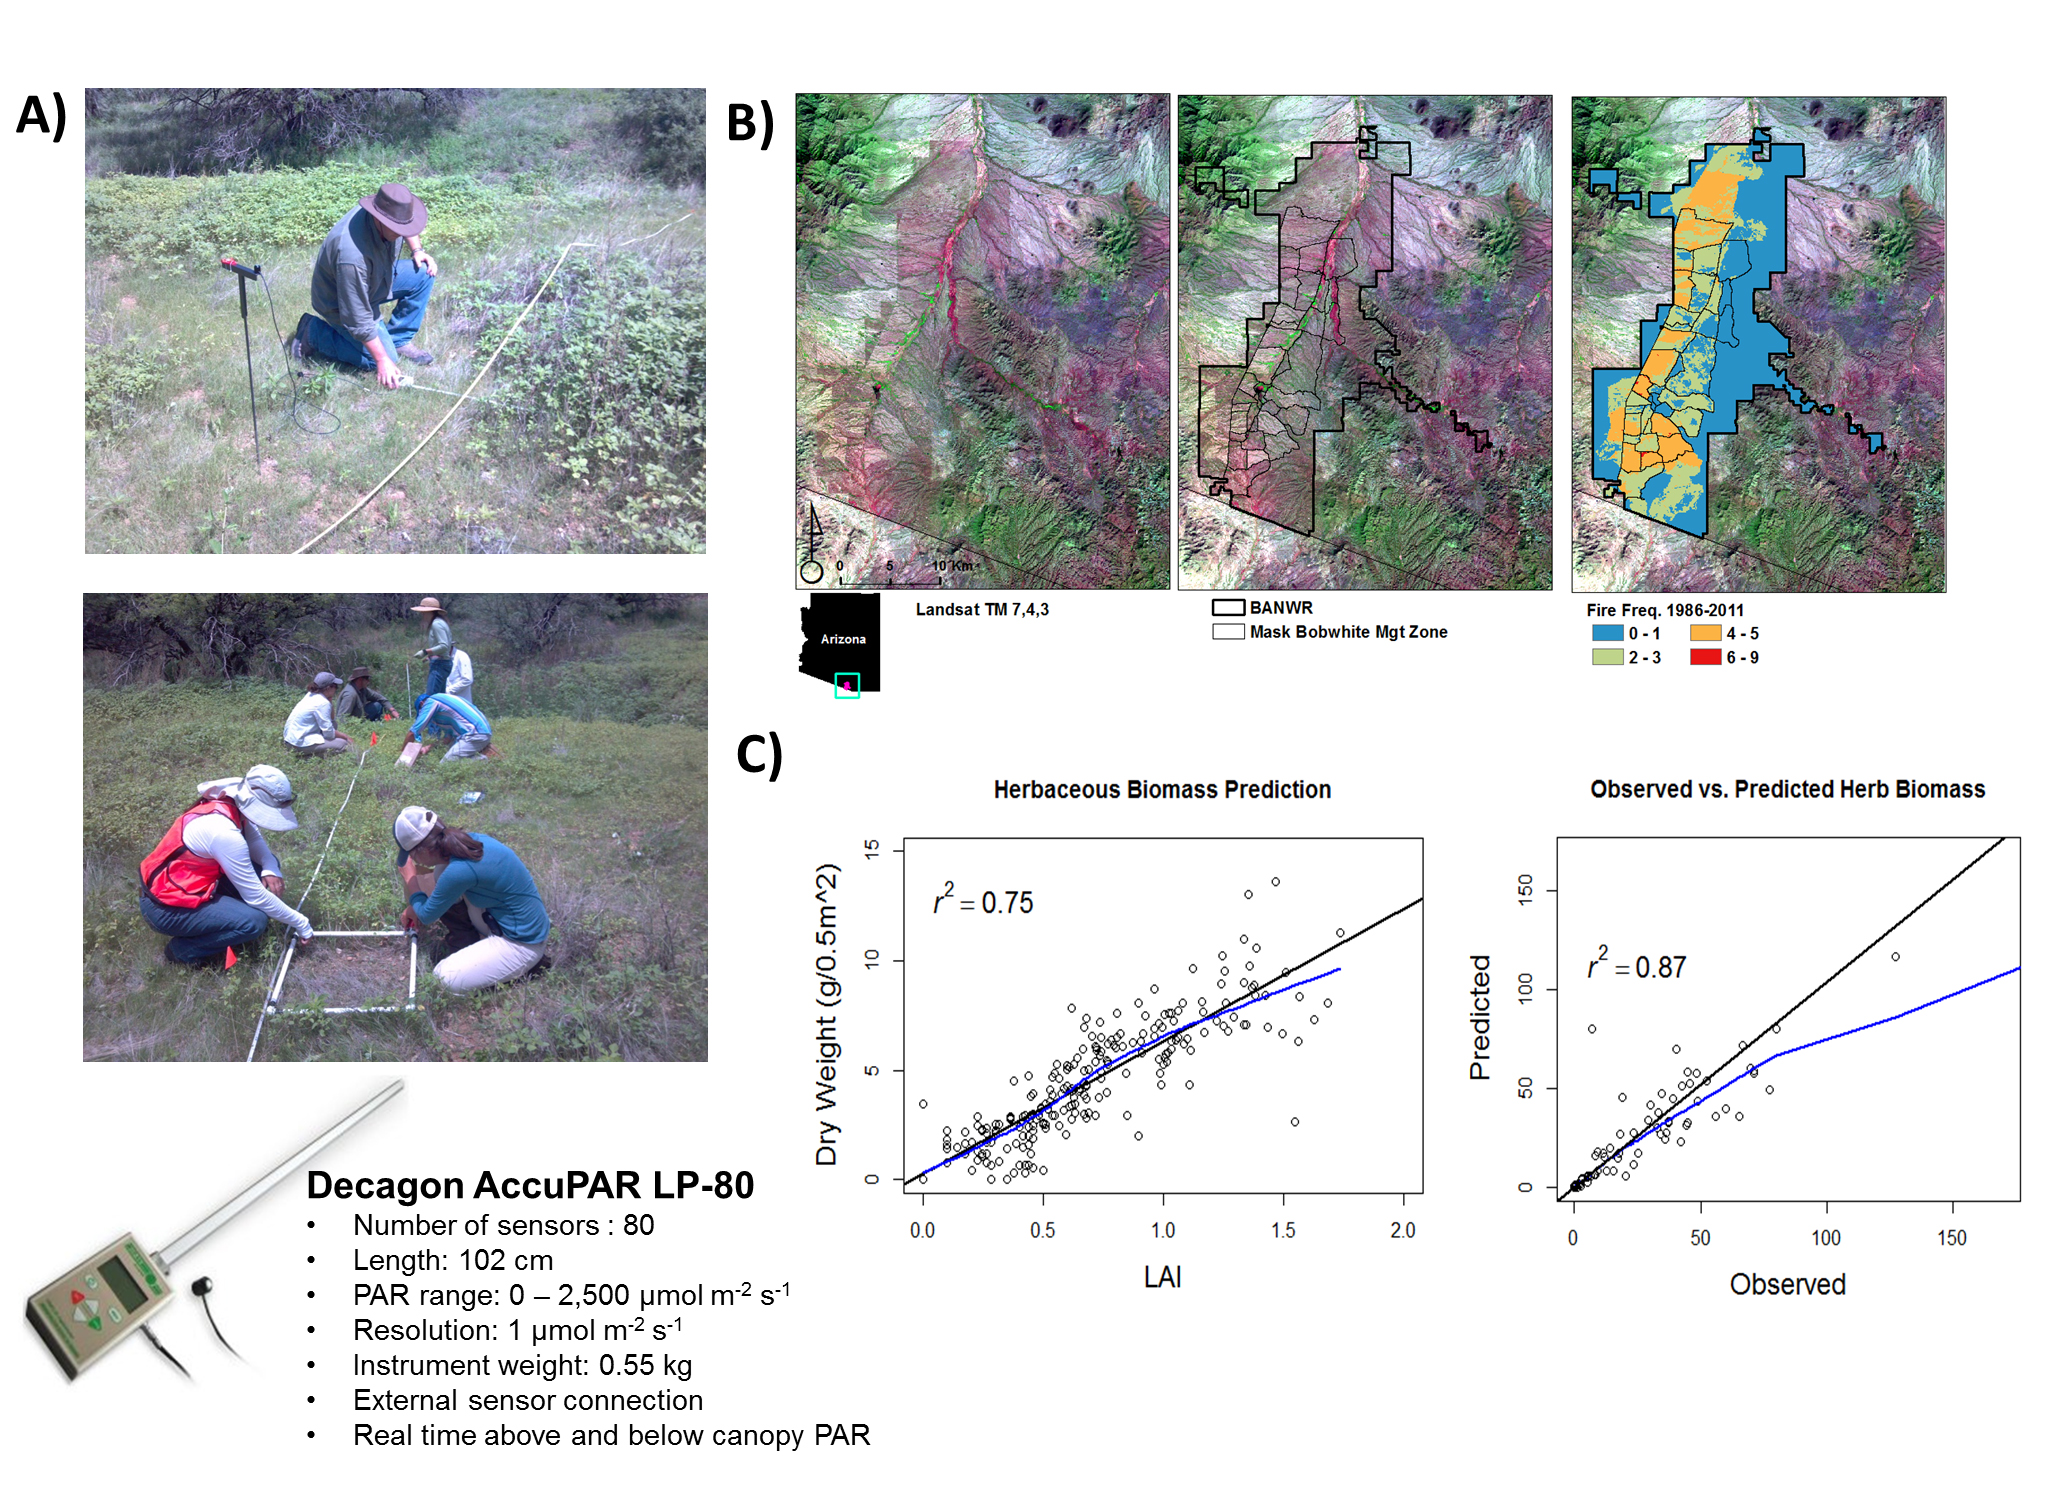 A) Ceptometer LAI measurements combined with destructive sampling for fine fuel and biomass model parameterization, B) Buenos Aires NWR 48,000-ha study site within the masked bobwhite management zone and fire frequency strata developed from the USFWS Fire Atlas and Landsat time series dNBR data, C) Scatterplot comparing LAI with dry biomass weight (right) and a comparison of dry biomass model predictions with validation biomass data left out of model development (left).